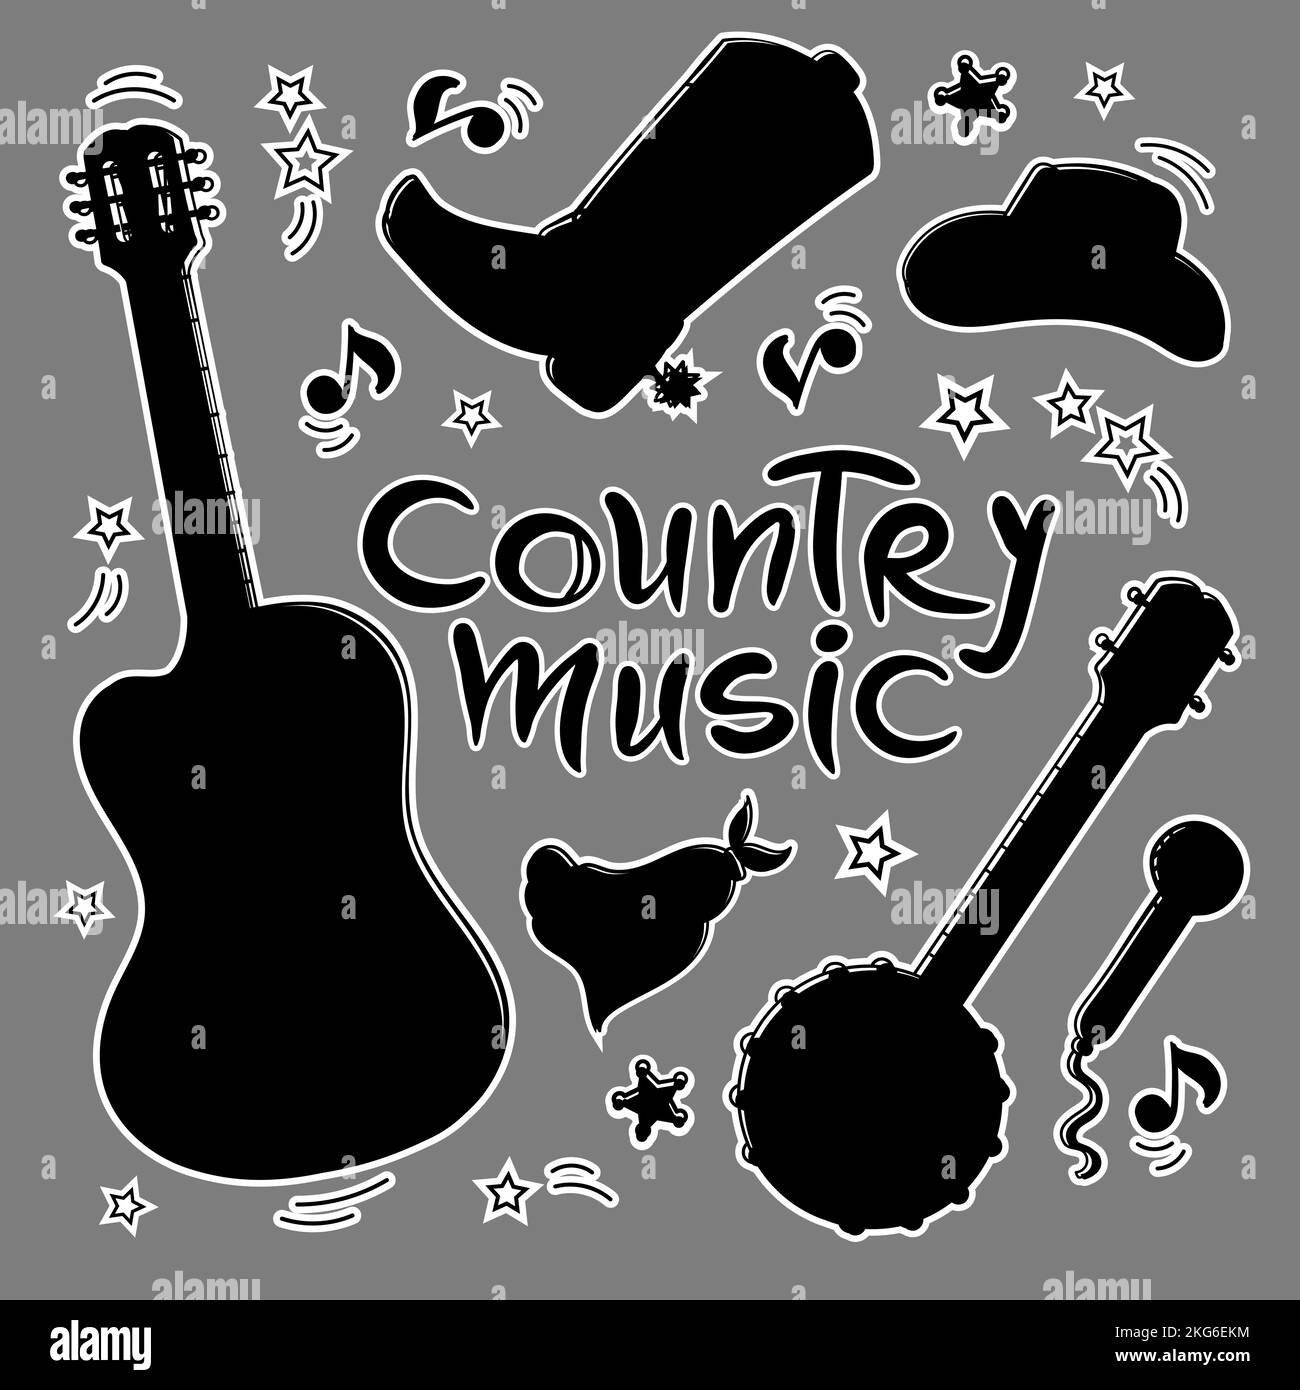 COUNTRY MUSIC SYMBOLS Cut Out Silhouettes American Cowboy Attributes Of Western Music Festival Country Vector Illustration Set For Print And Cutting Stock Vector